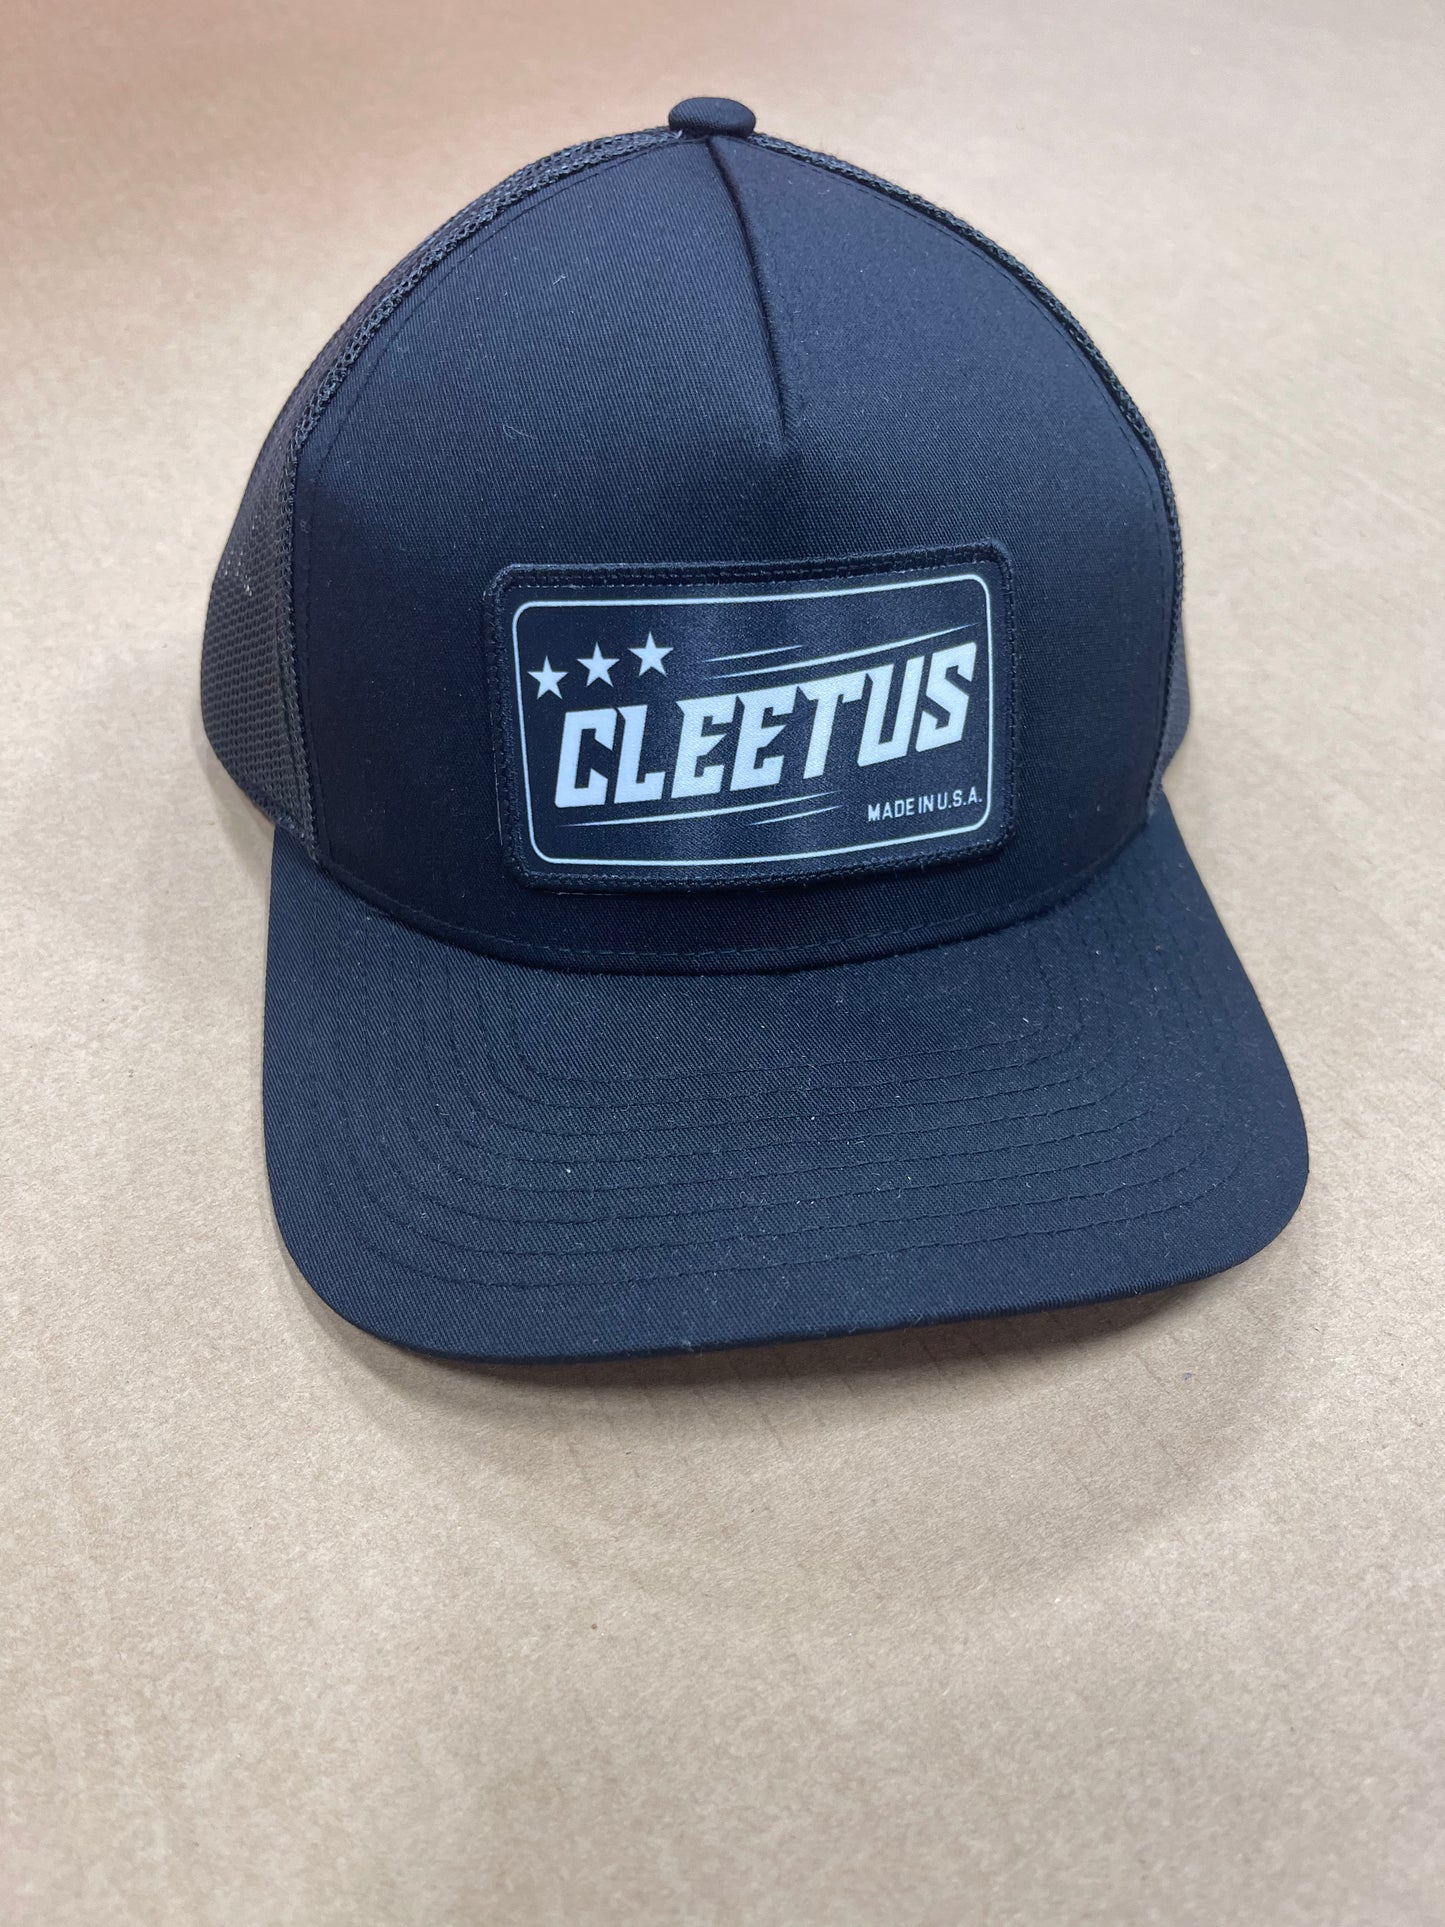 Sublimated Machine Cleetus Patch Hat